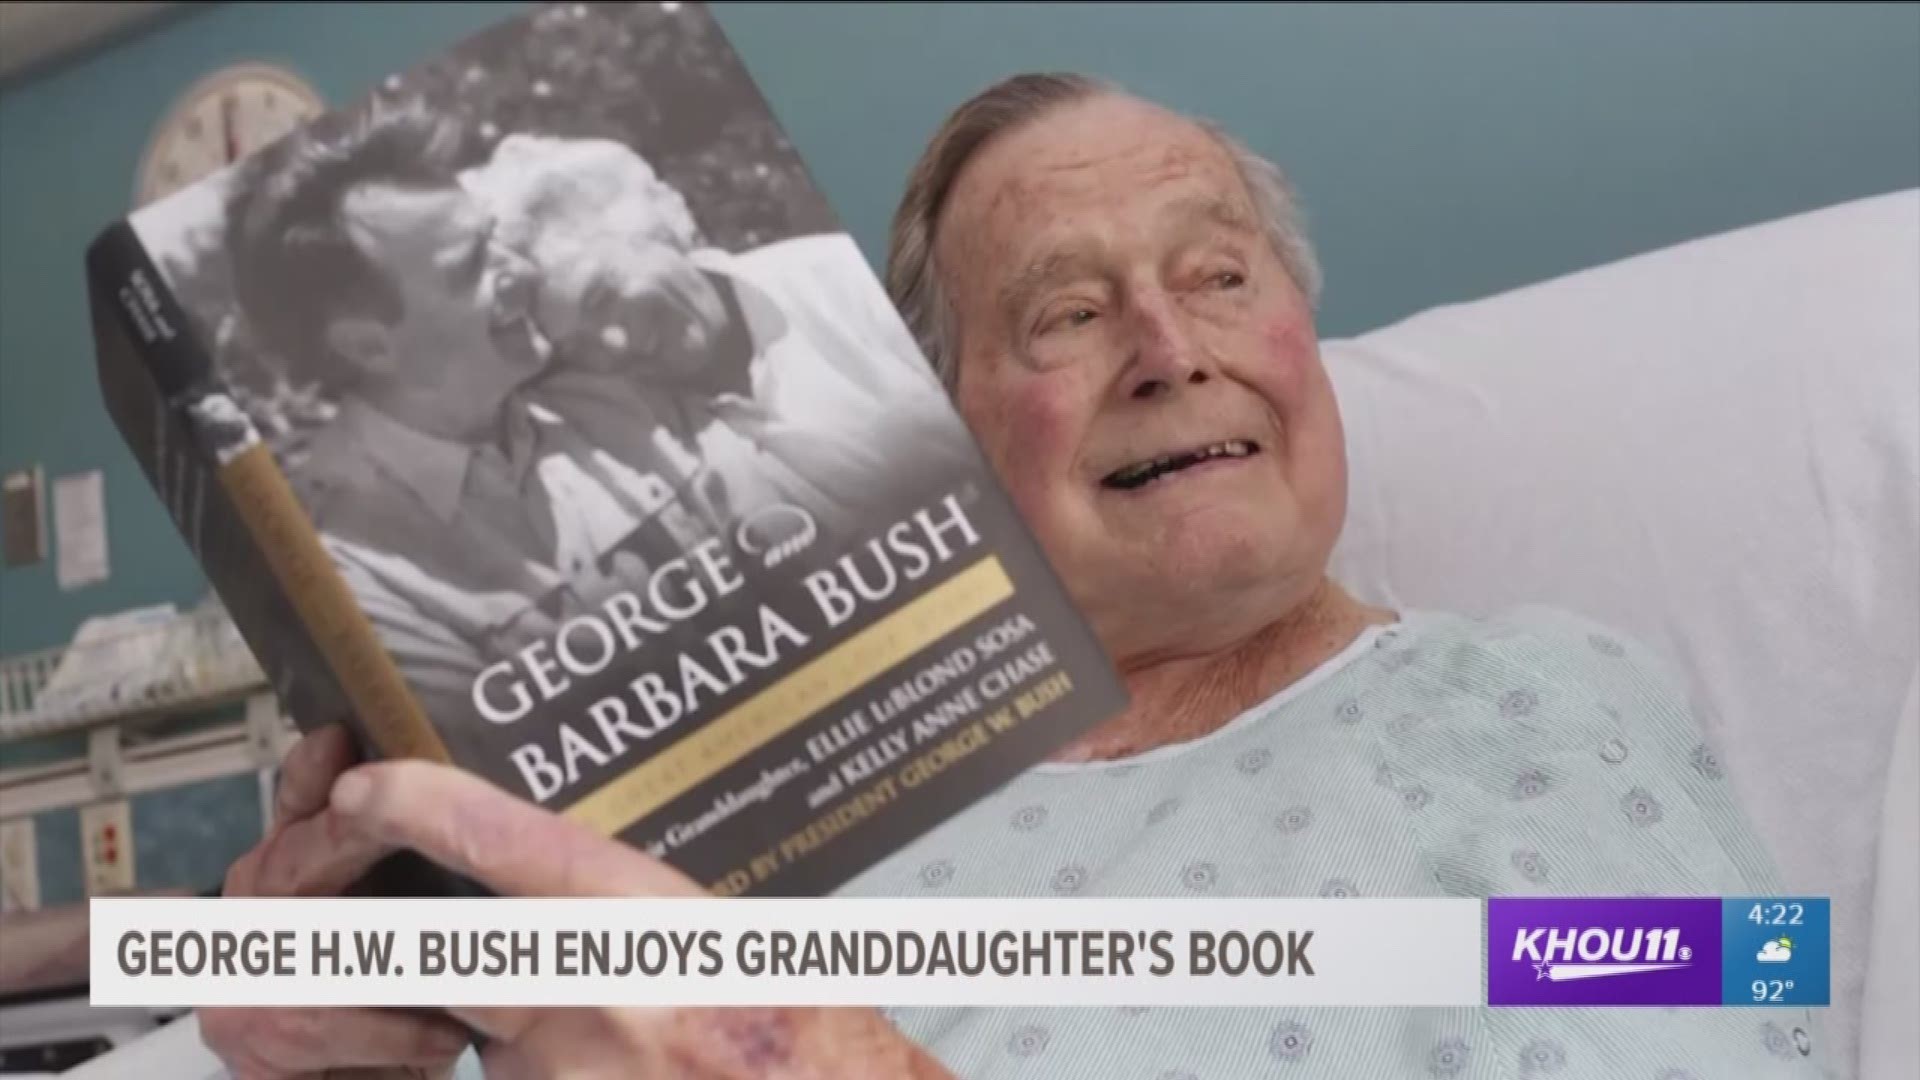 George H.W. Bush is looking healthy and happy in a new photo from his hospital room shared on Twitter Friday.